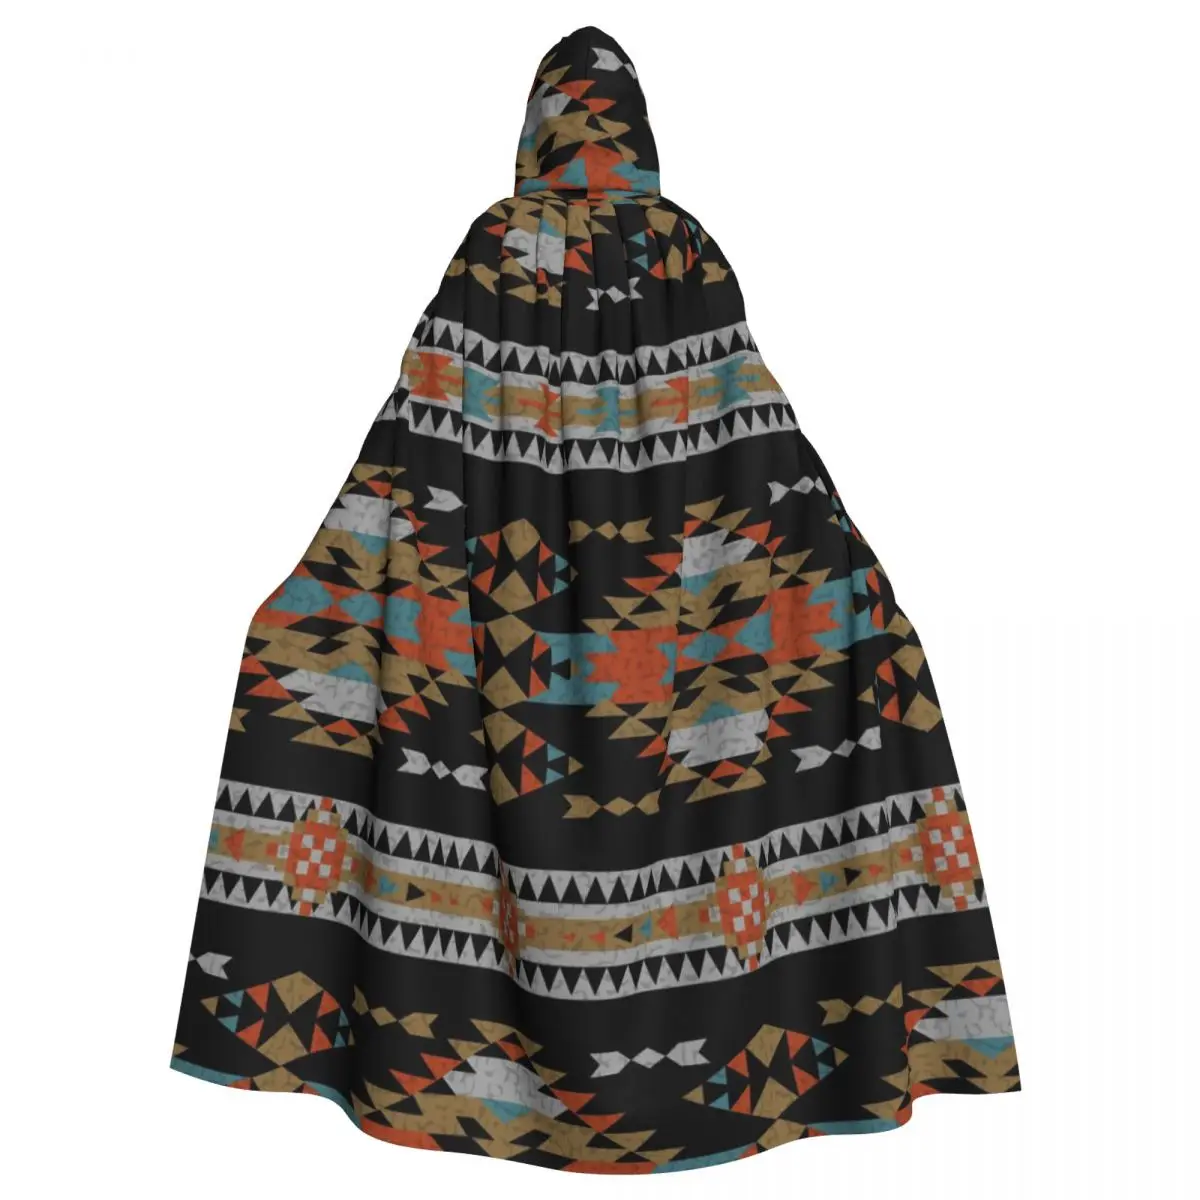 Hooded Cloak Unisex Cloak with Hood Indian Aztec Ethnic Cloak Vampire Witch Cape Cosplay Costume